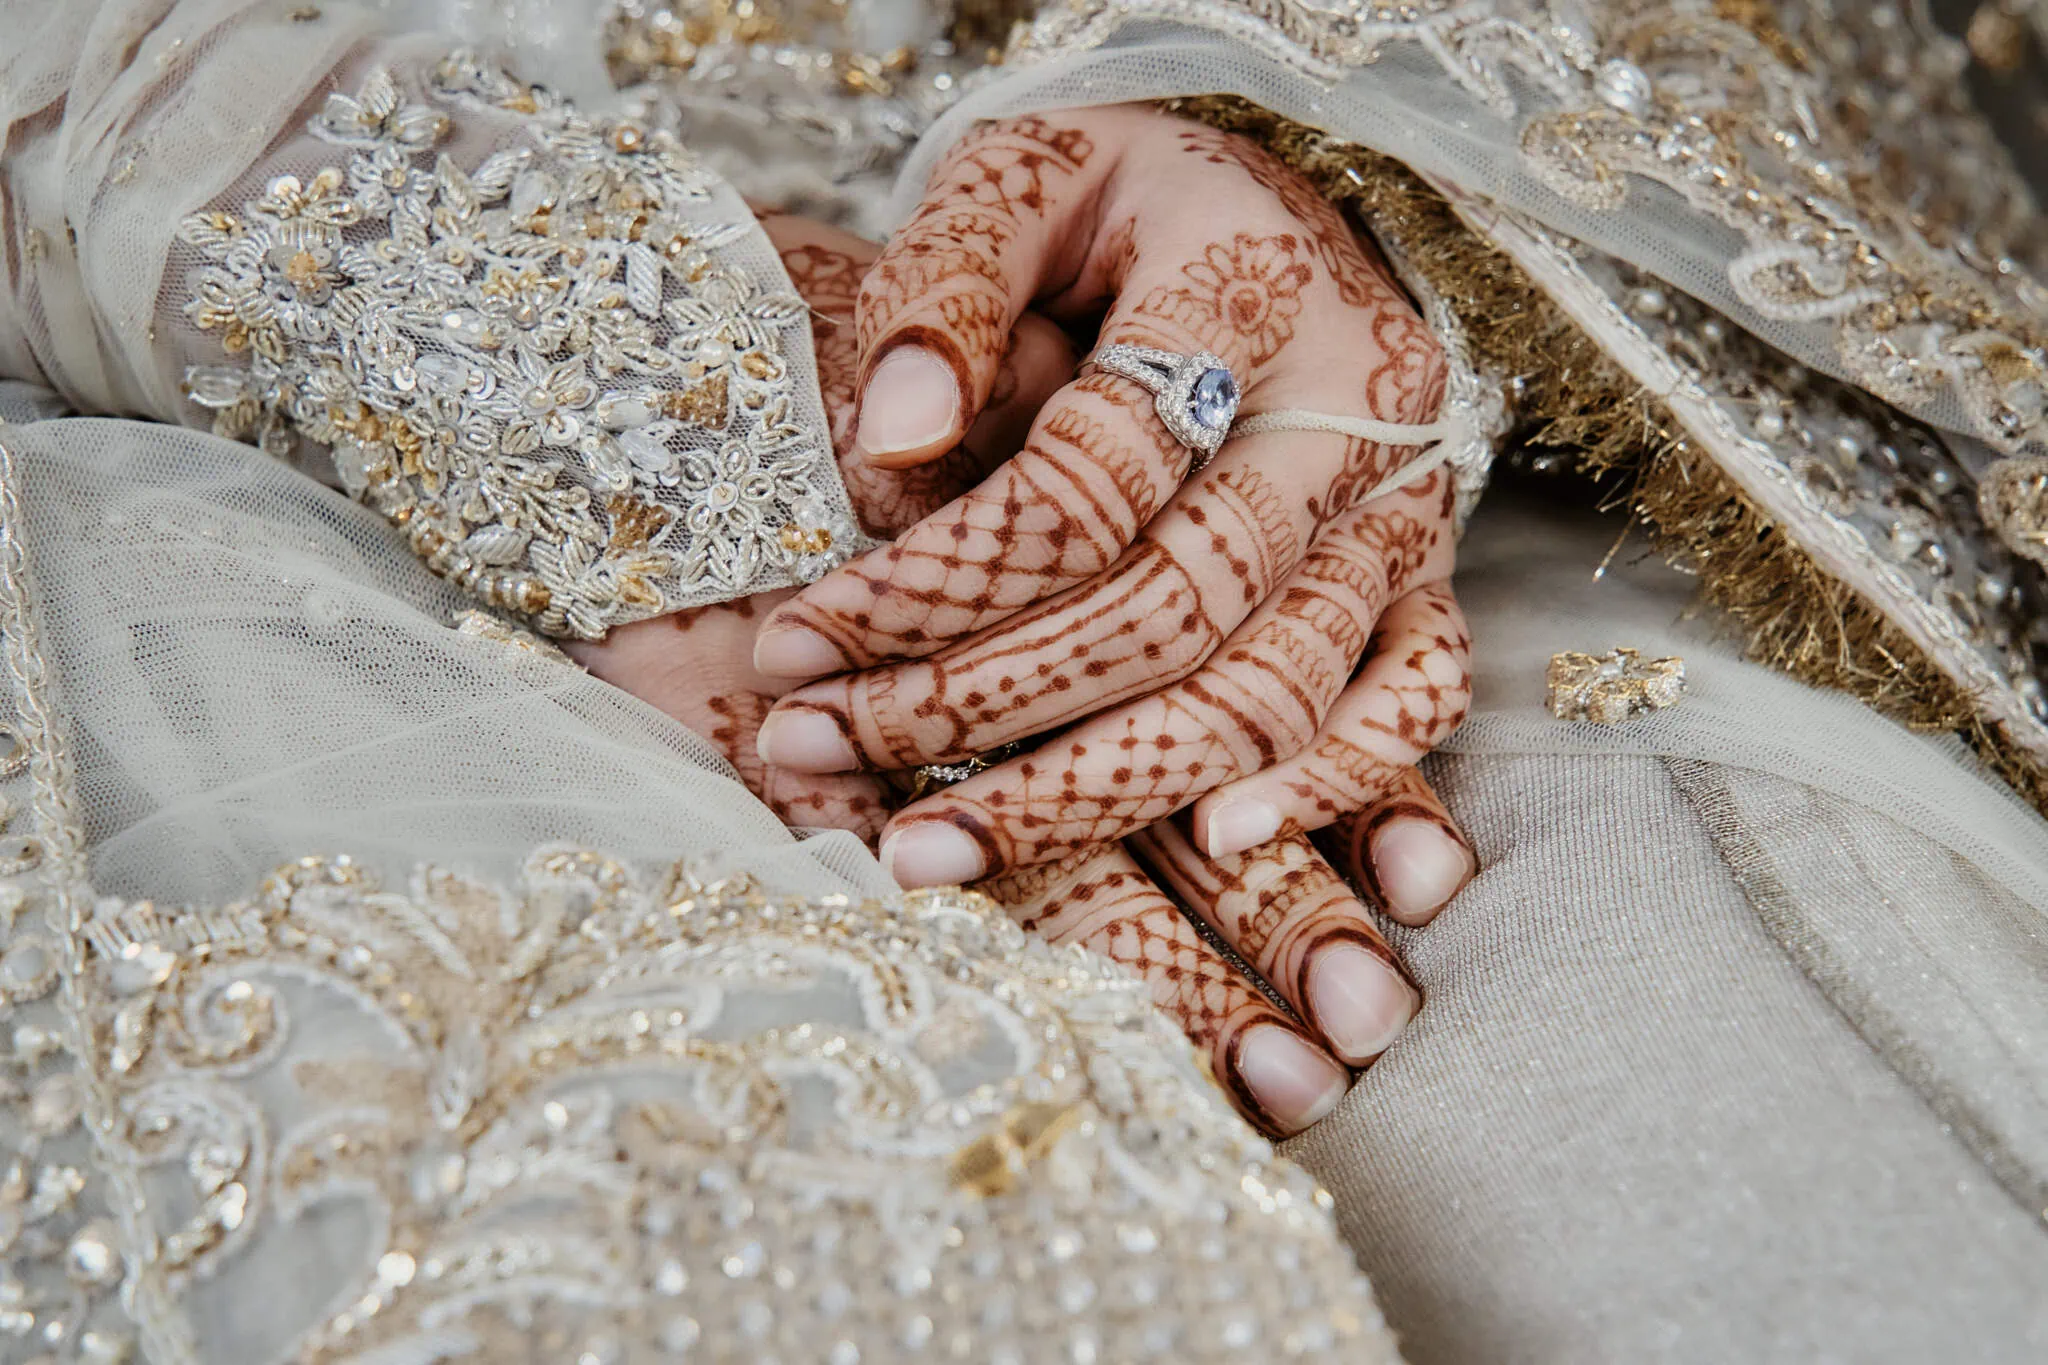 Queenstown New Zealand Elopement Wedding Photographer - A bride's hands adorned with henna at the Queenstown Islamic Wedding of Wasim and Yumn.